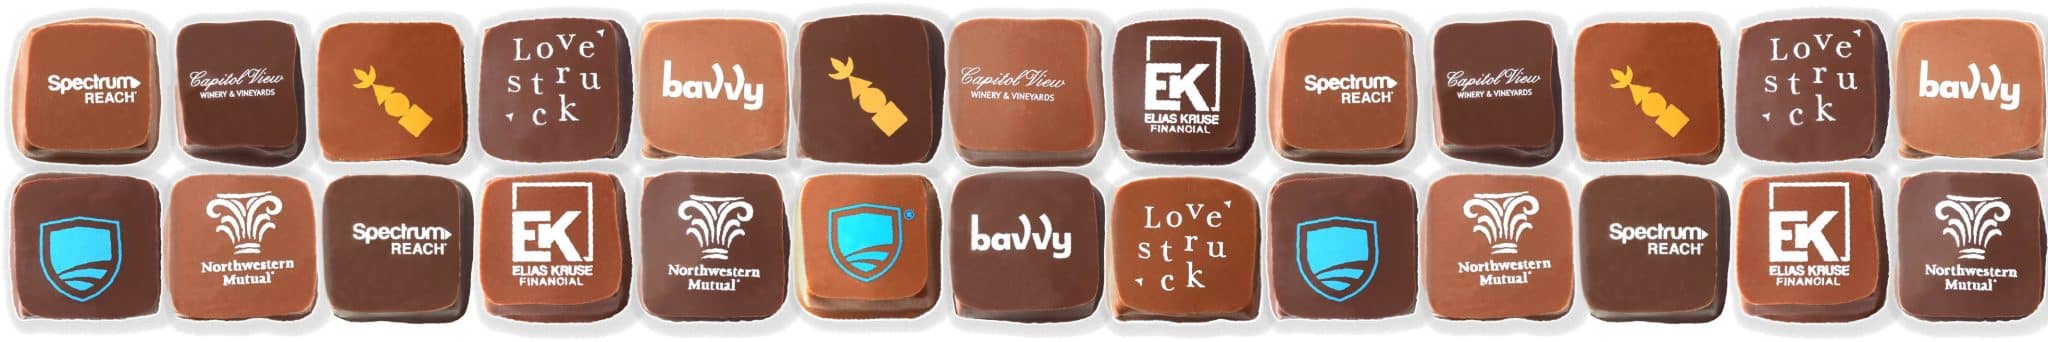 Two rows of gourmet chocolate bonbons with different company logos on them